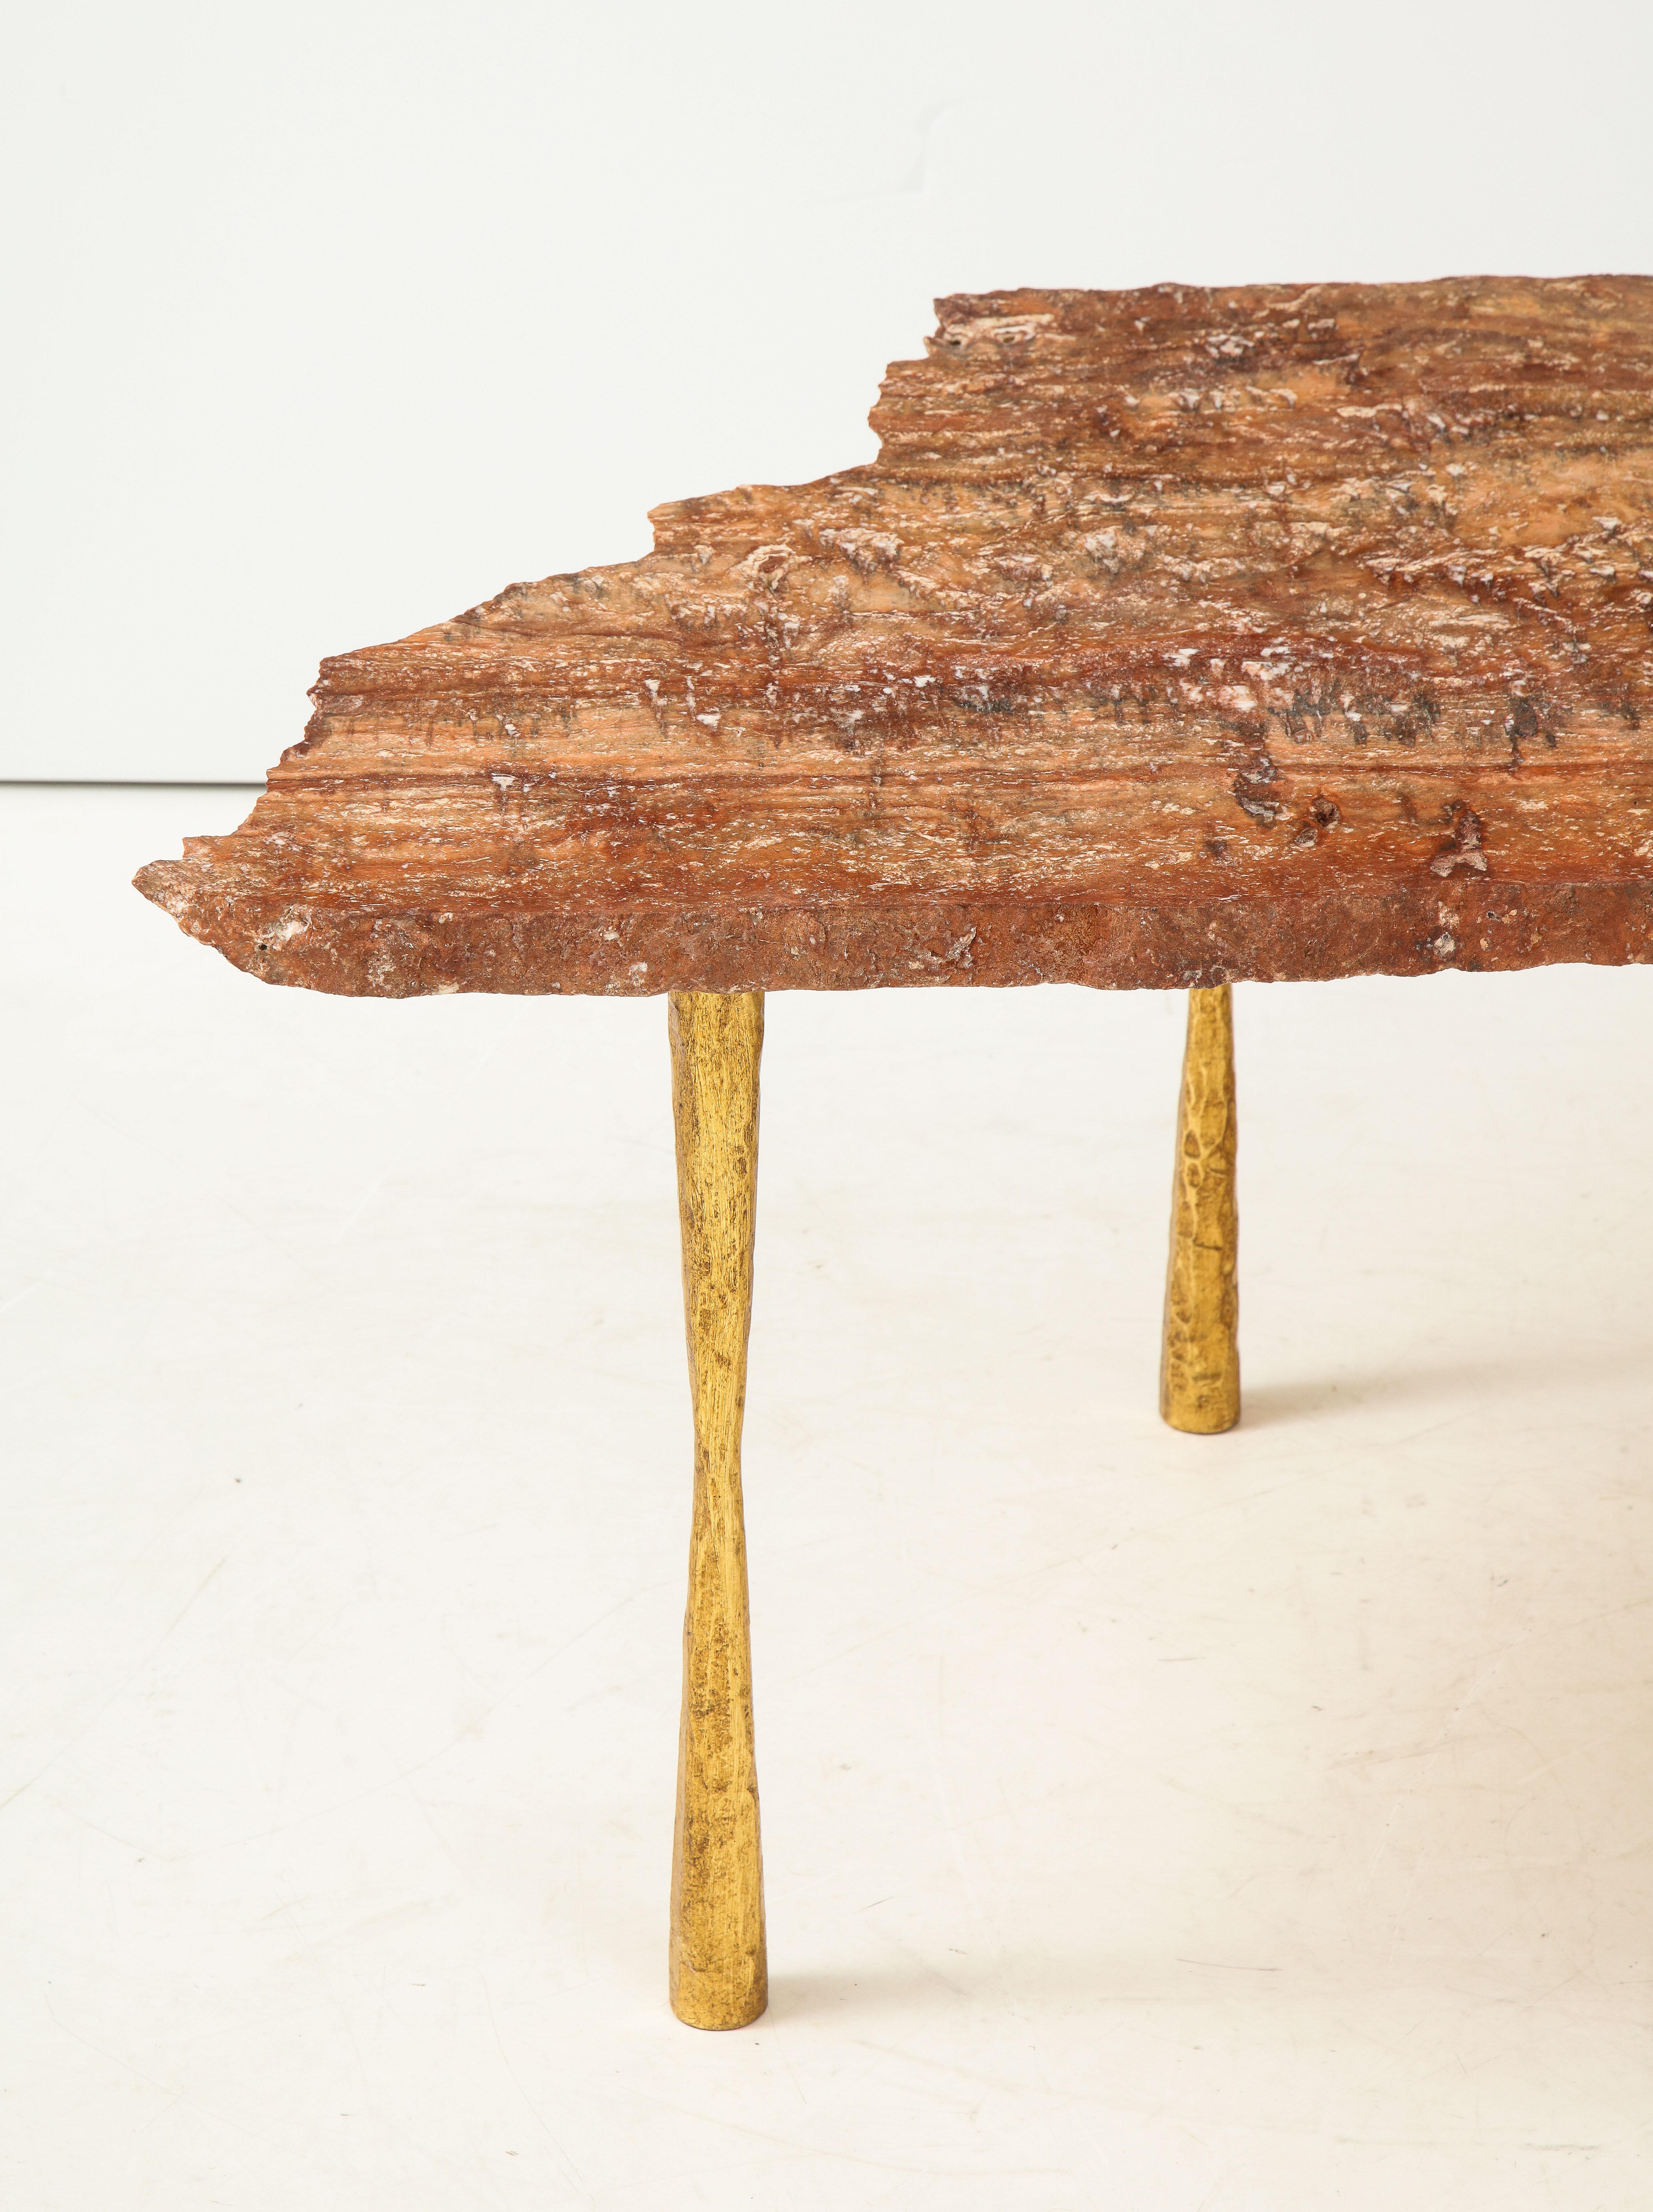 Italian Red Brown Travertine Natural Edge Slab Stone and Gold Leaf Cocktail Table, Italy For Sale